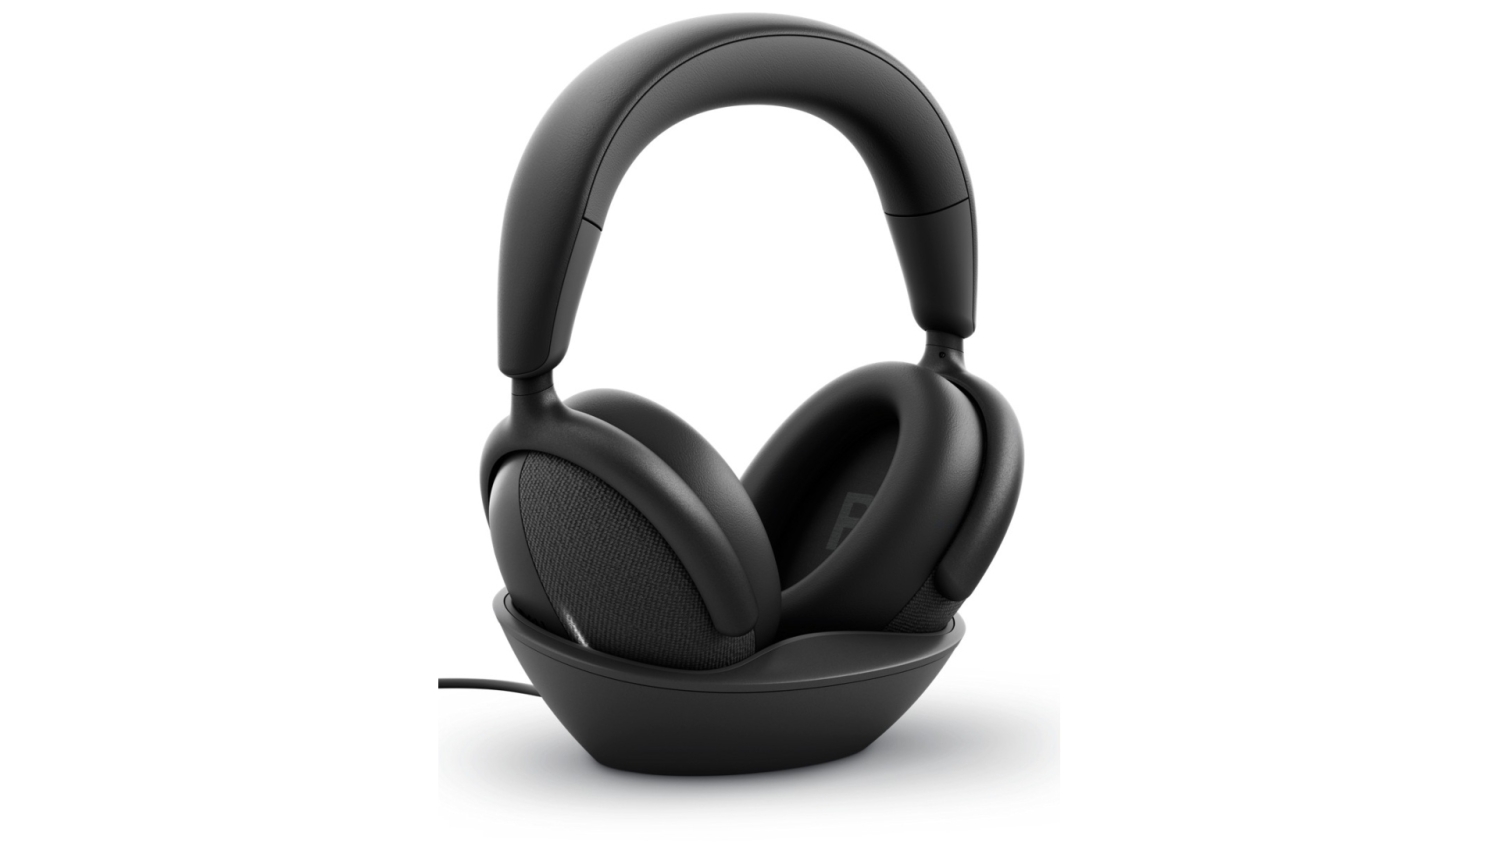 TweakTown Enlarged Image - Dell Premier Wireless ANC Headset (WL7024) with charging dock, image credit: Dell.